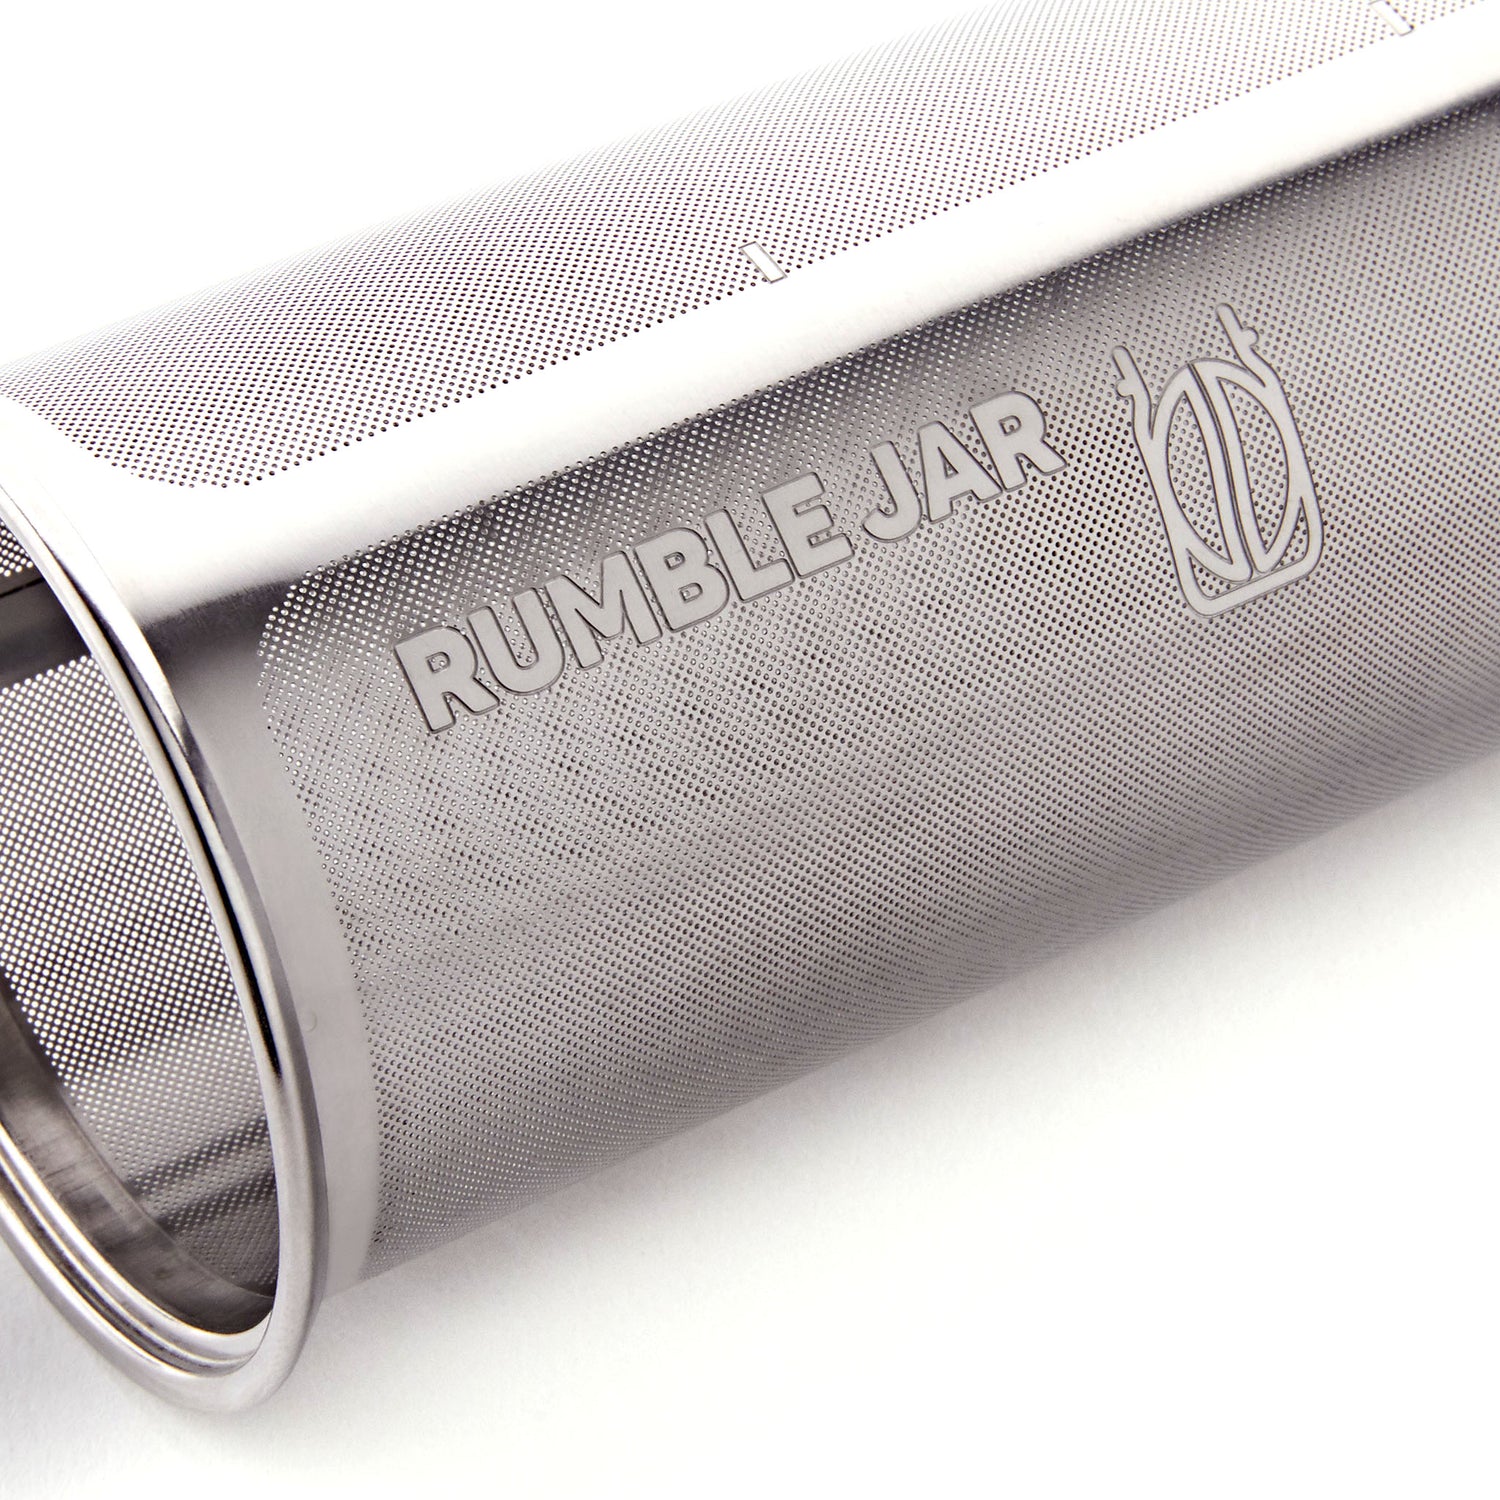 Rumble Jar's stainless steel construction is far more durable than typical mesh filters